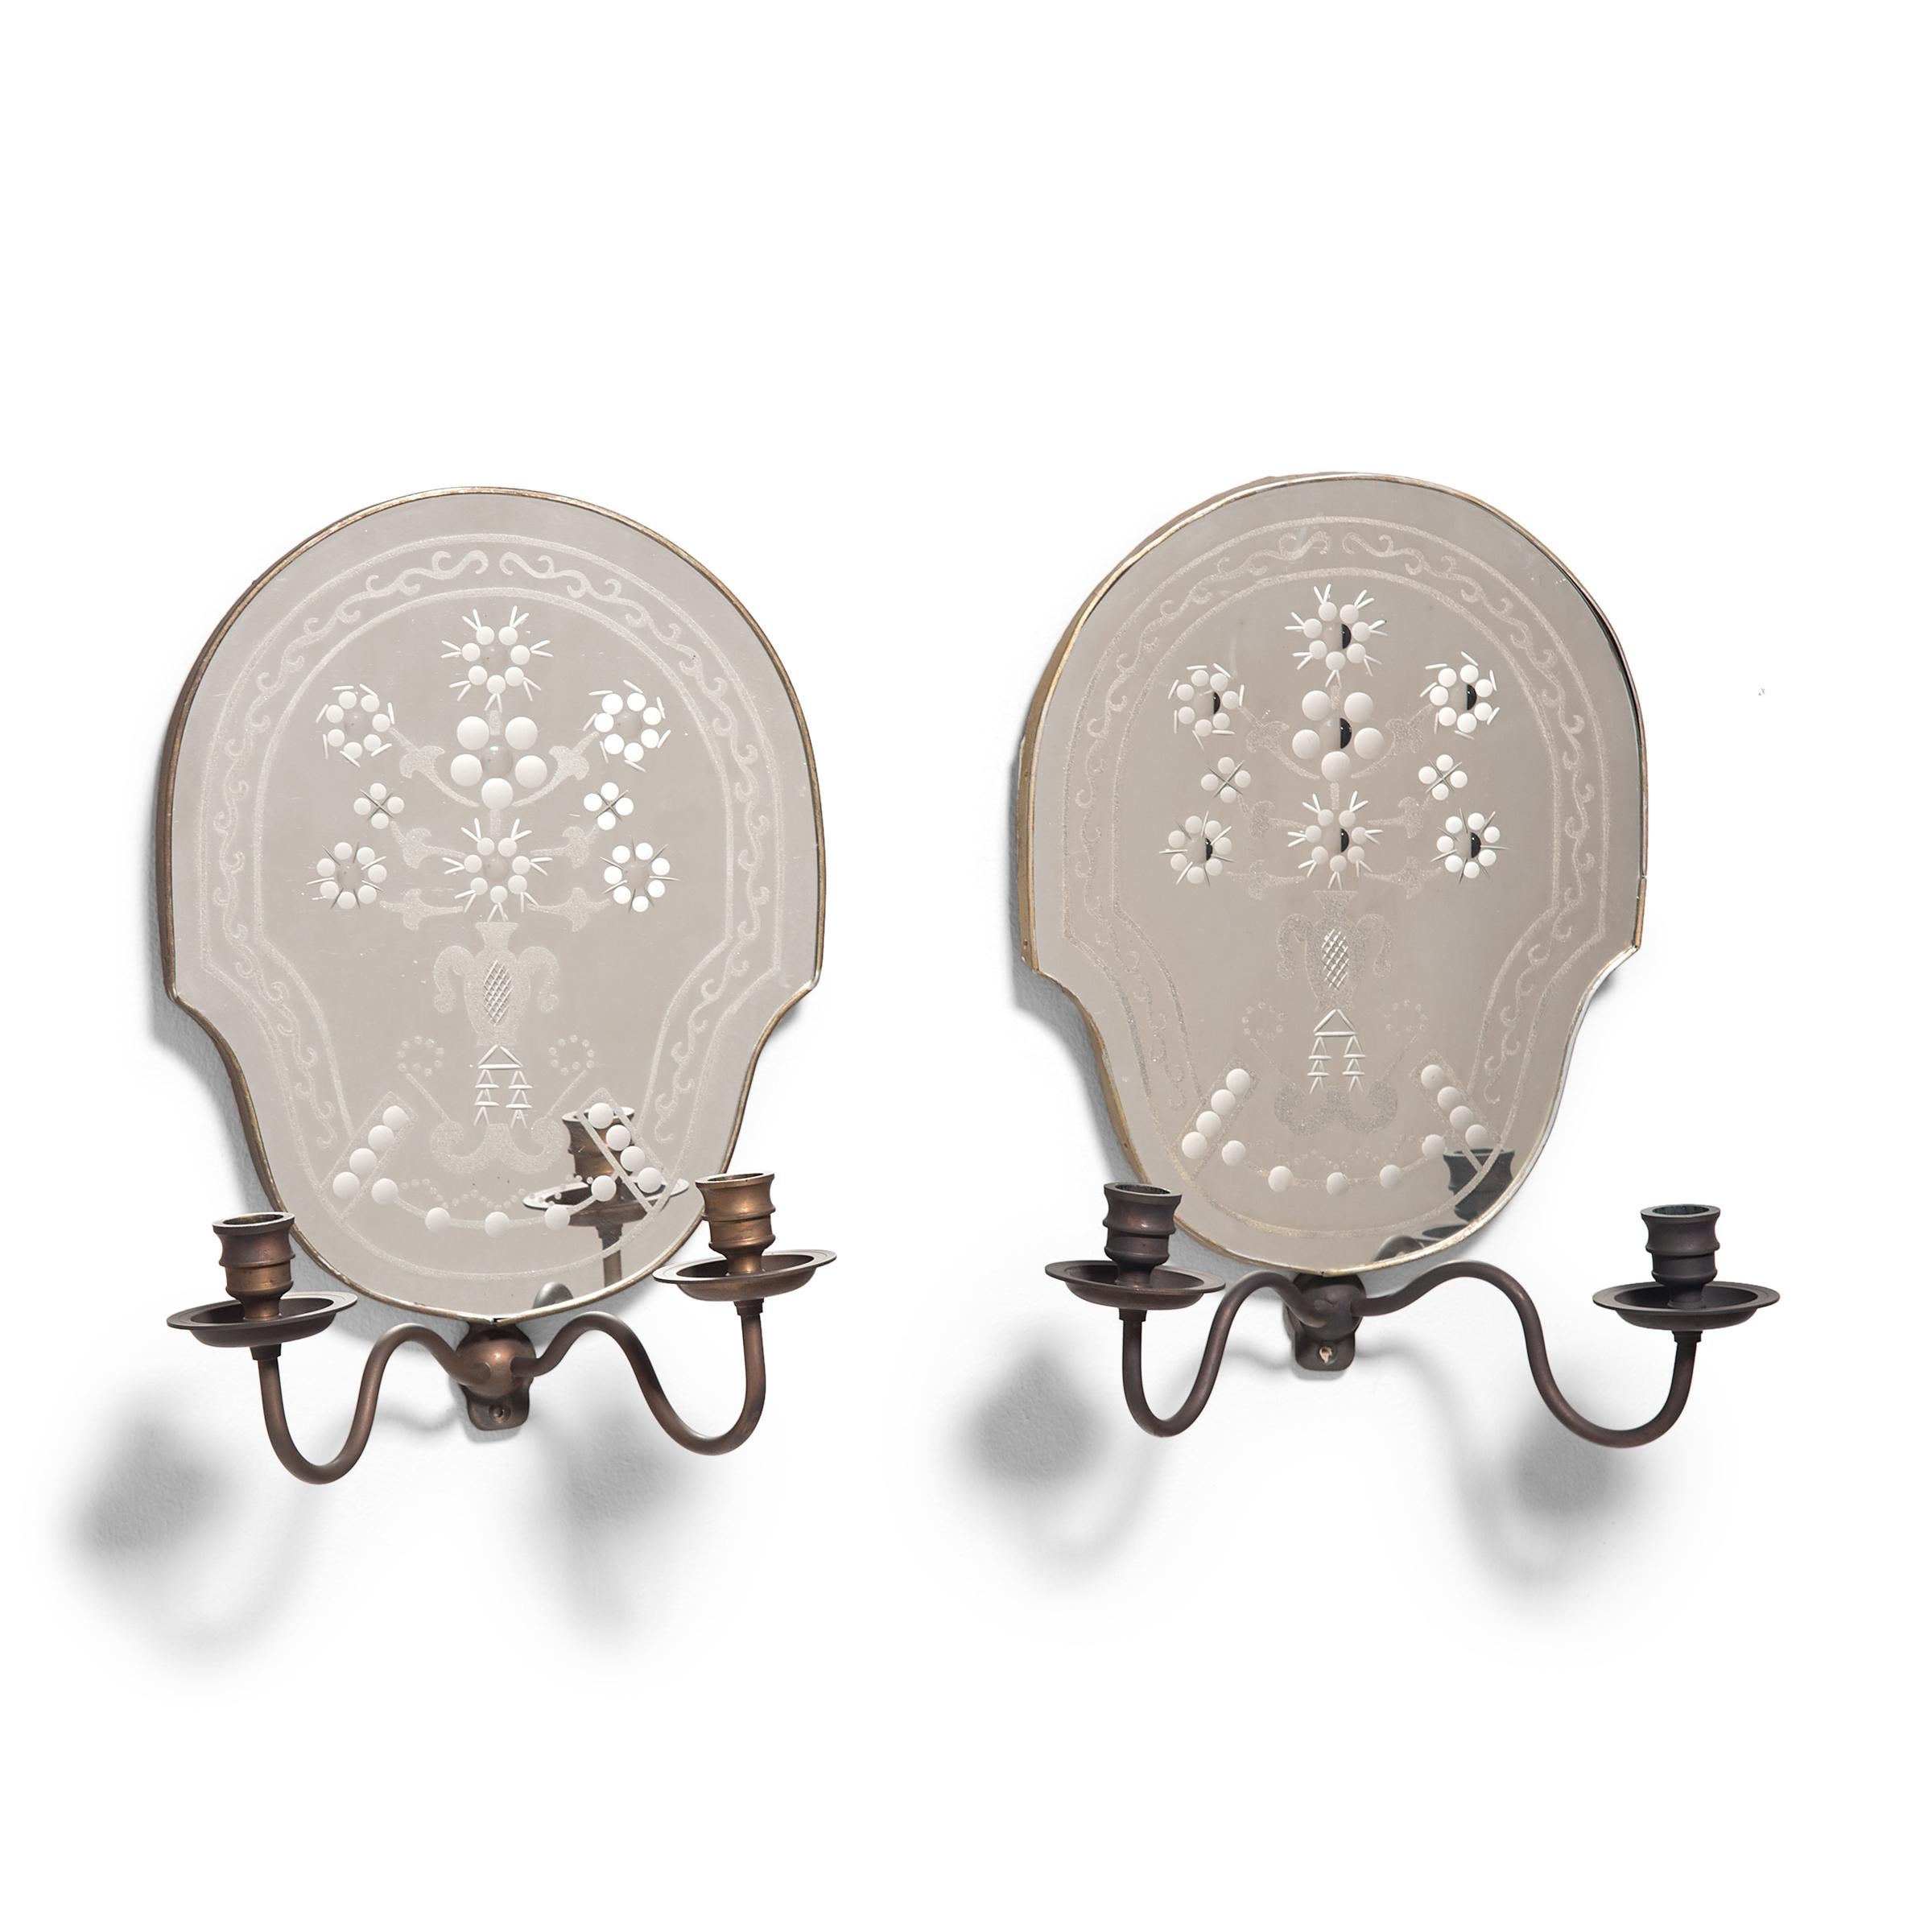 Delicate and refined, these contemporary wall-mounted candle sconces by Vaughan are designed with decorative mirrored backings in the tradition of Venetian etched mirrors. The mirrored backings have a rounded, oblong shape and are etched, cut, and